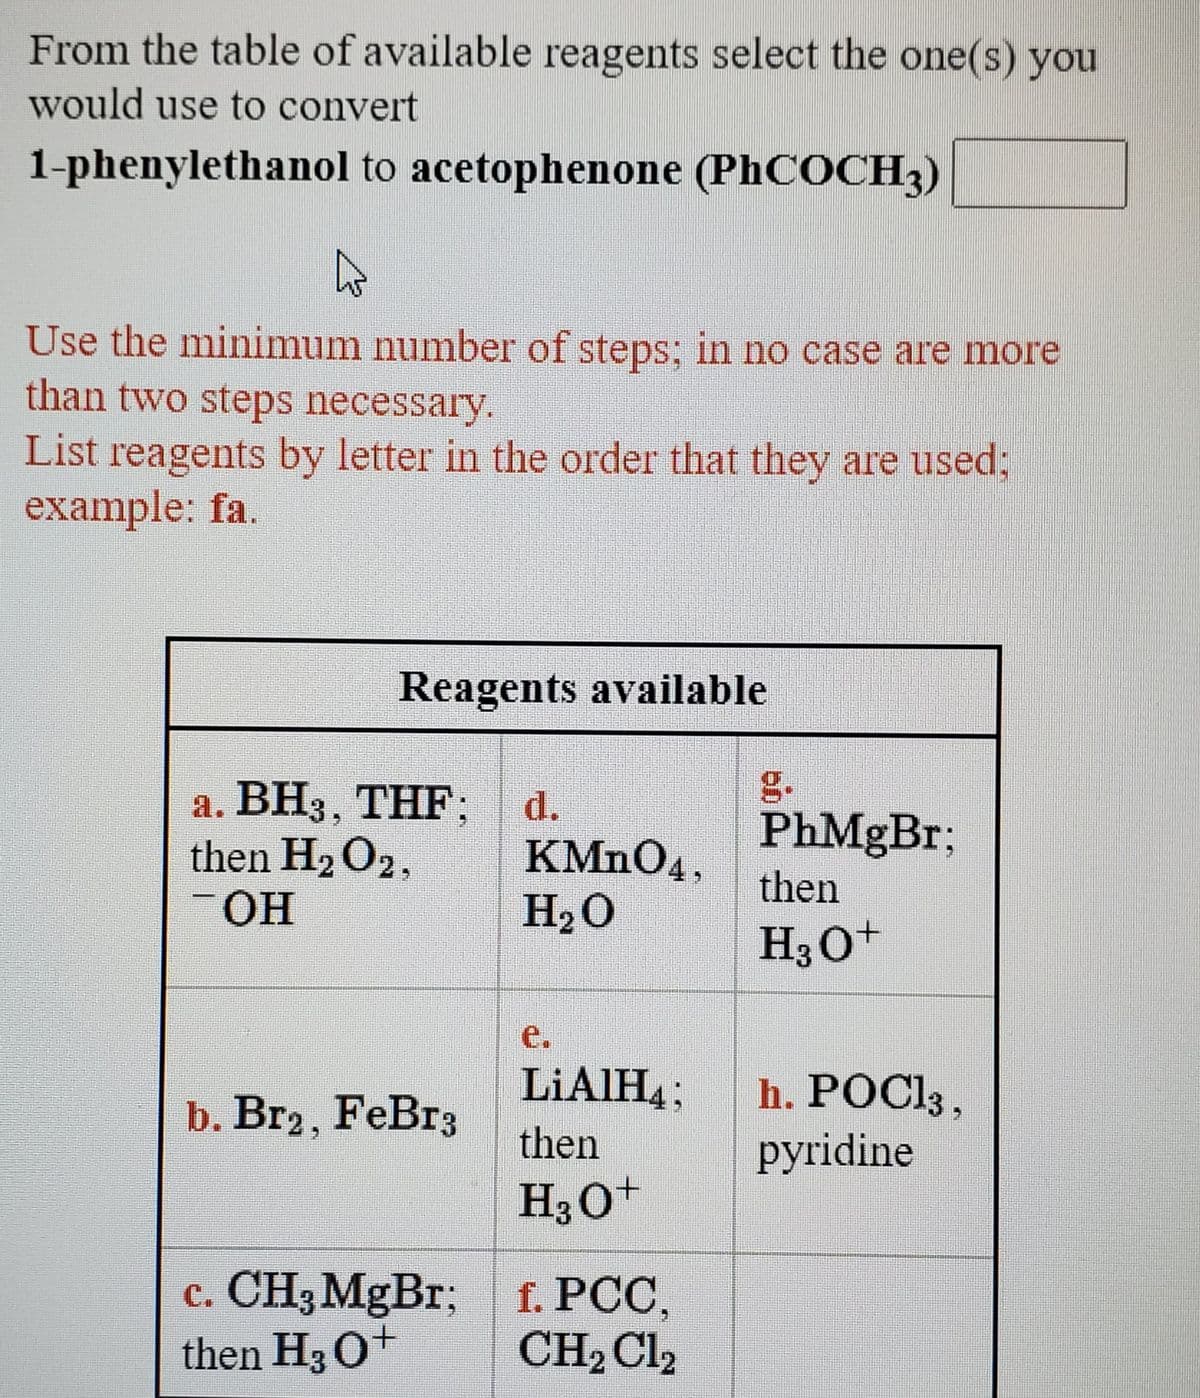 From the table of available reagents select the one(s) you
would use to convert
1-phenylethanol to acetophenone (PHCOCH3)
Use the minimum number of steps; in no case are more
than two steps necessary.
List reagents by letter in the order that they are used;
example: fa.
Reagents available
g.
а. ВНз, ТHF:
then H2O2,
-OH
d.
PhMgBr;
KMNO4,
H2O
then
H30+
e.
LIAIH4;
h. POCI3,
pyridine
b. Br2, FeBr3
then
H30+
c. CH3MgBr; f. PCC,
then H3 0+
CH2 Cl2
